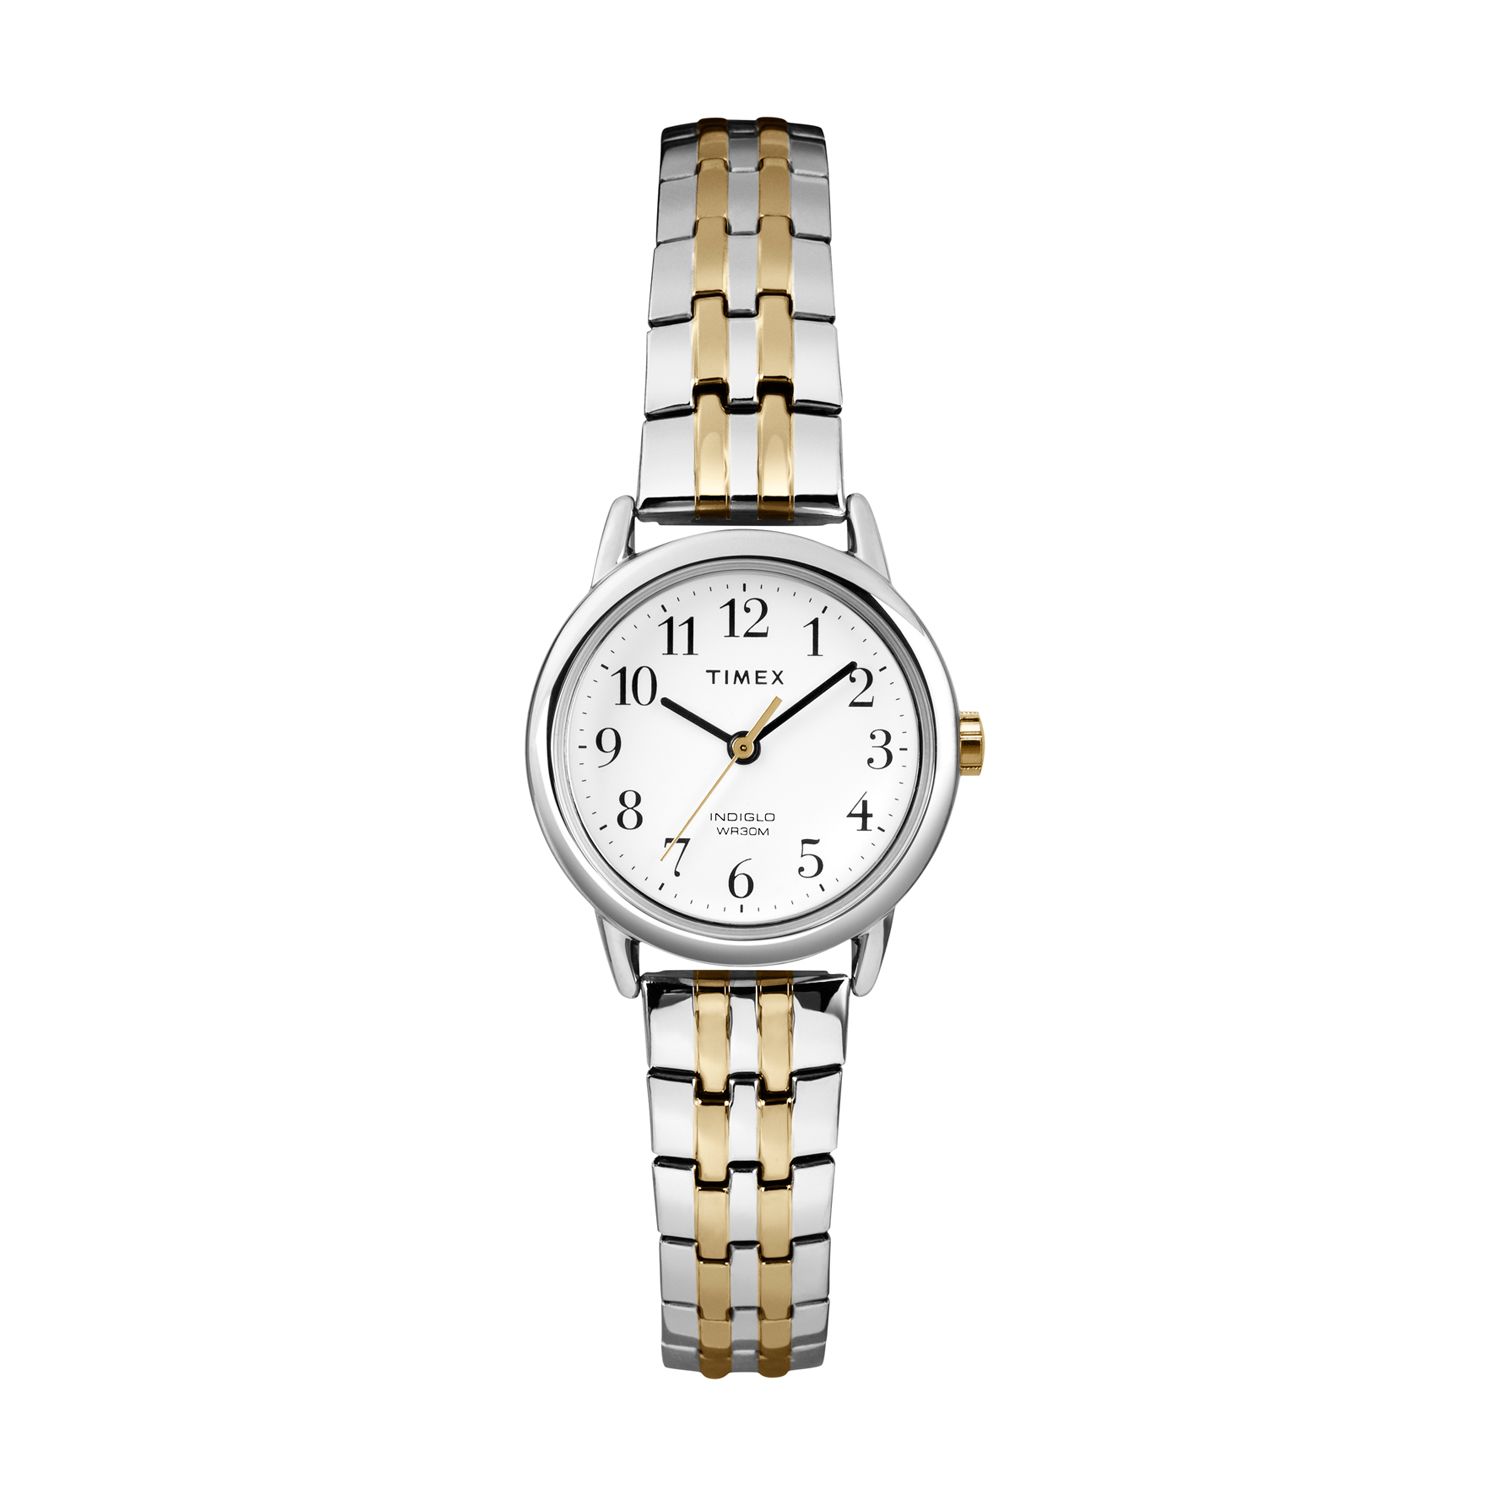 Kohls Womens Watches Norway, SAVE 45% 